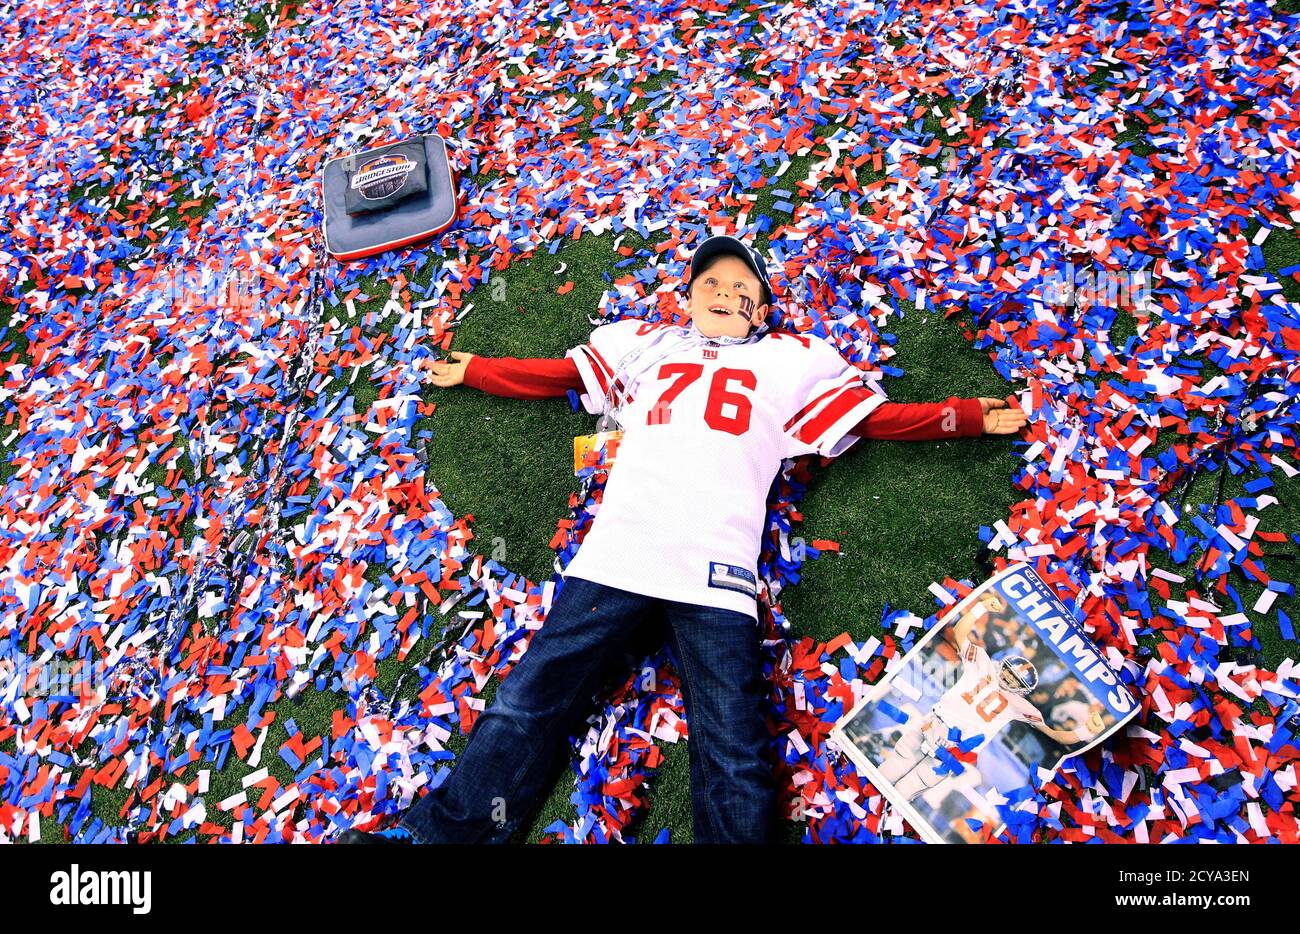 Dylan Snee, 8, son of New York Giants player Chris Snee and head coach Tom  Coughlin's grandson plays in the confetti after the New York Giants  defeated the New England Patriots in